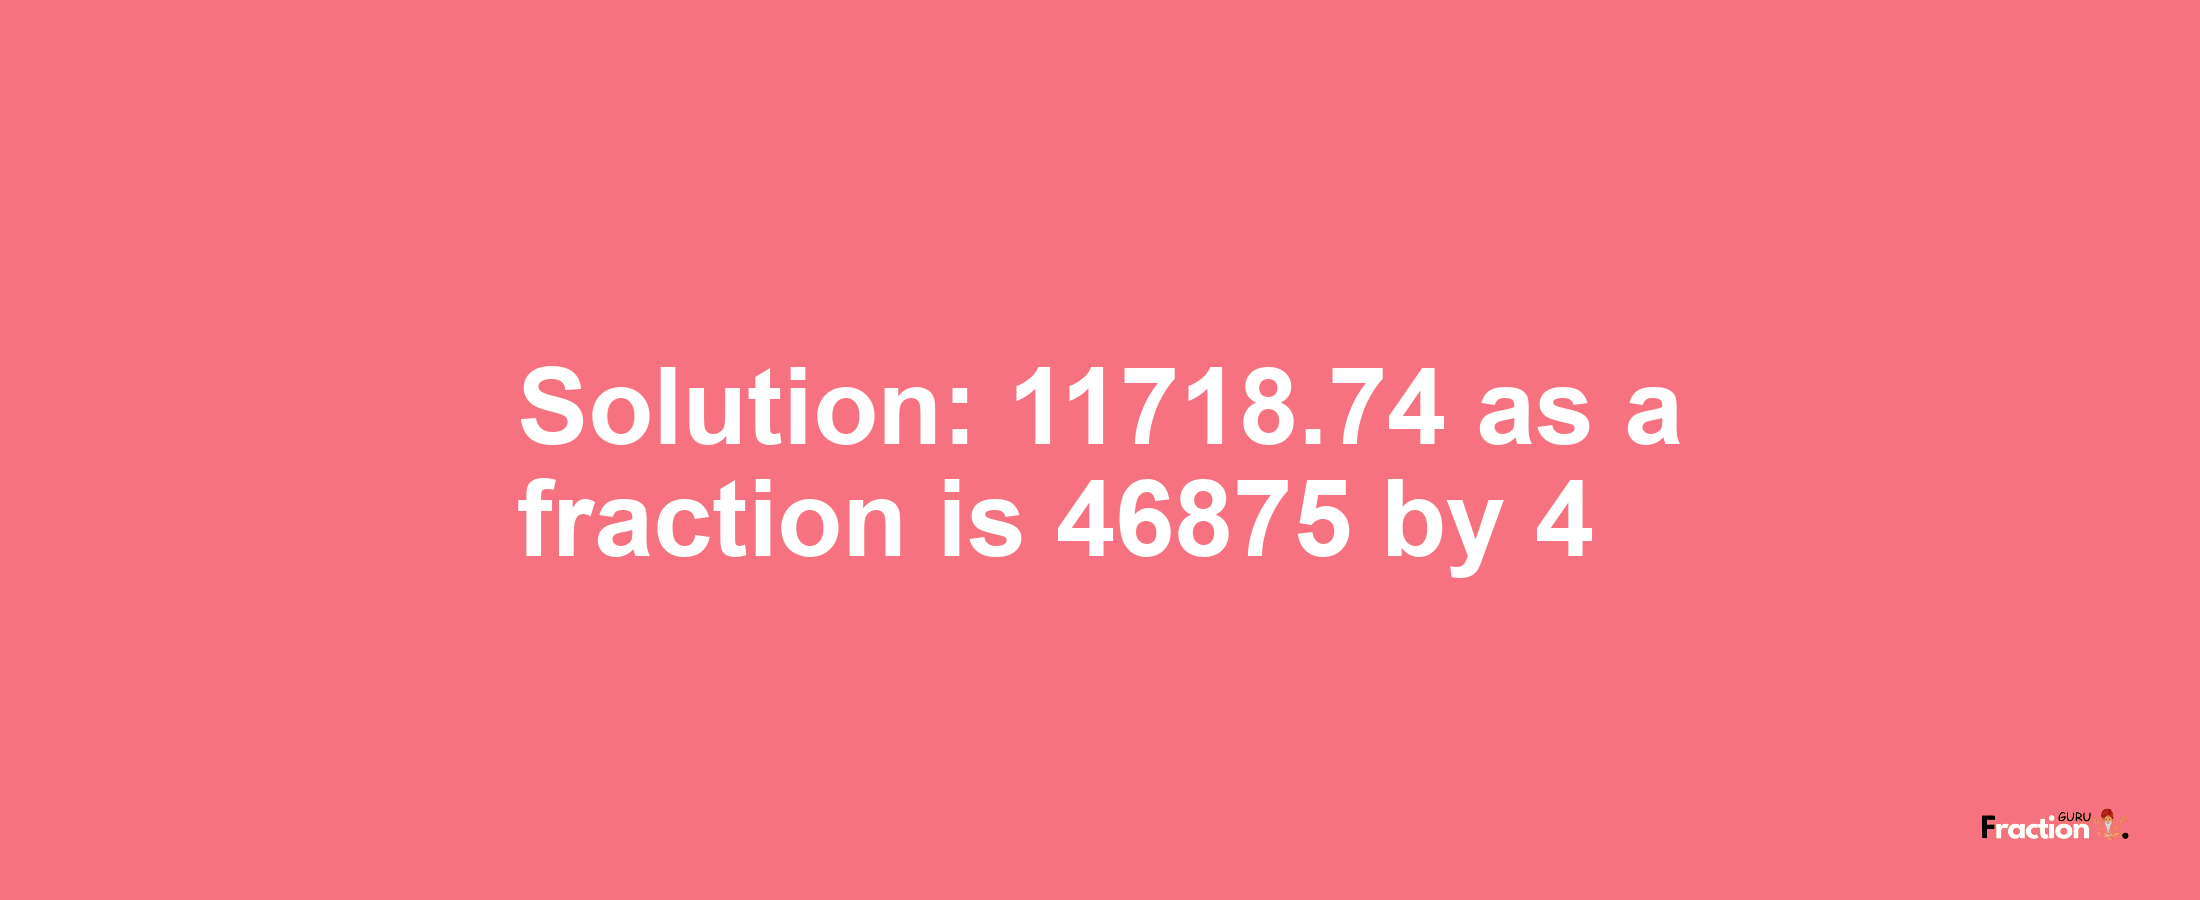 Solution:11718.74 as a fraction is 46875/4